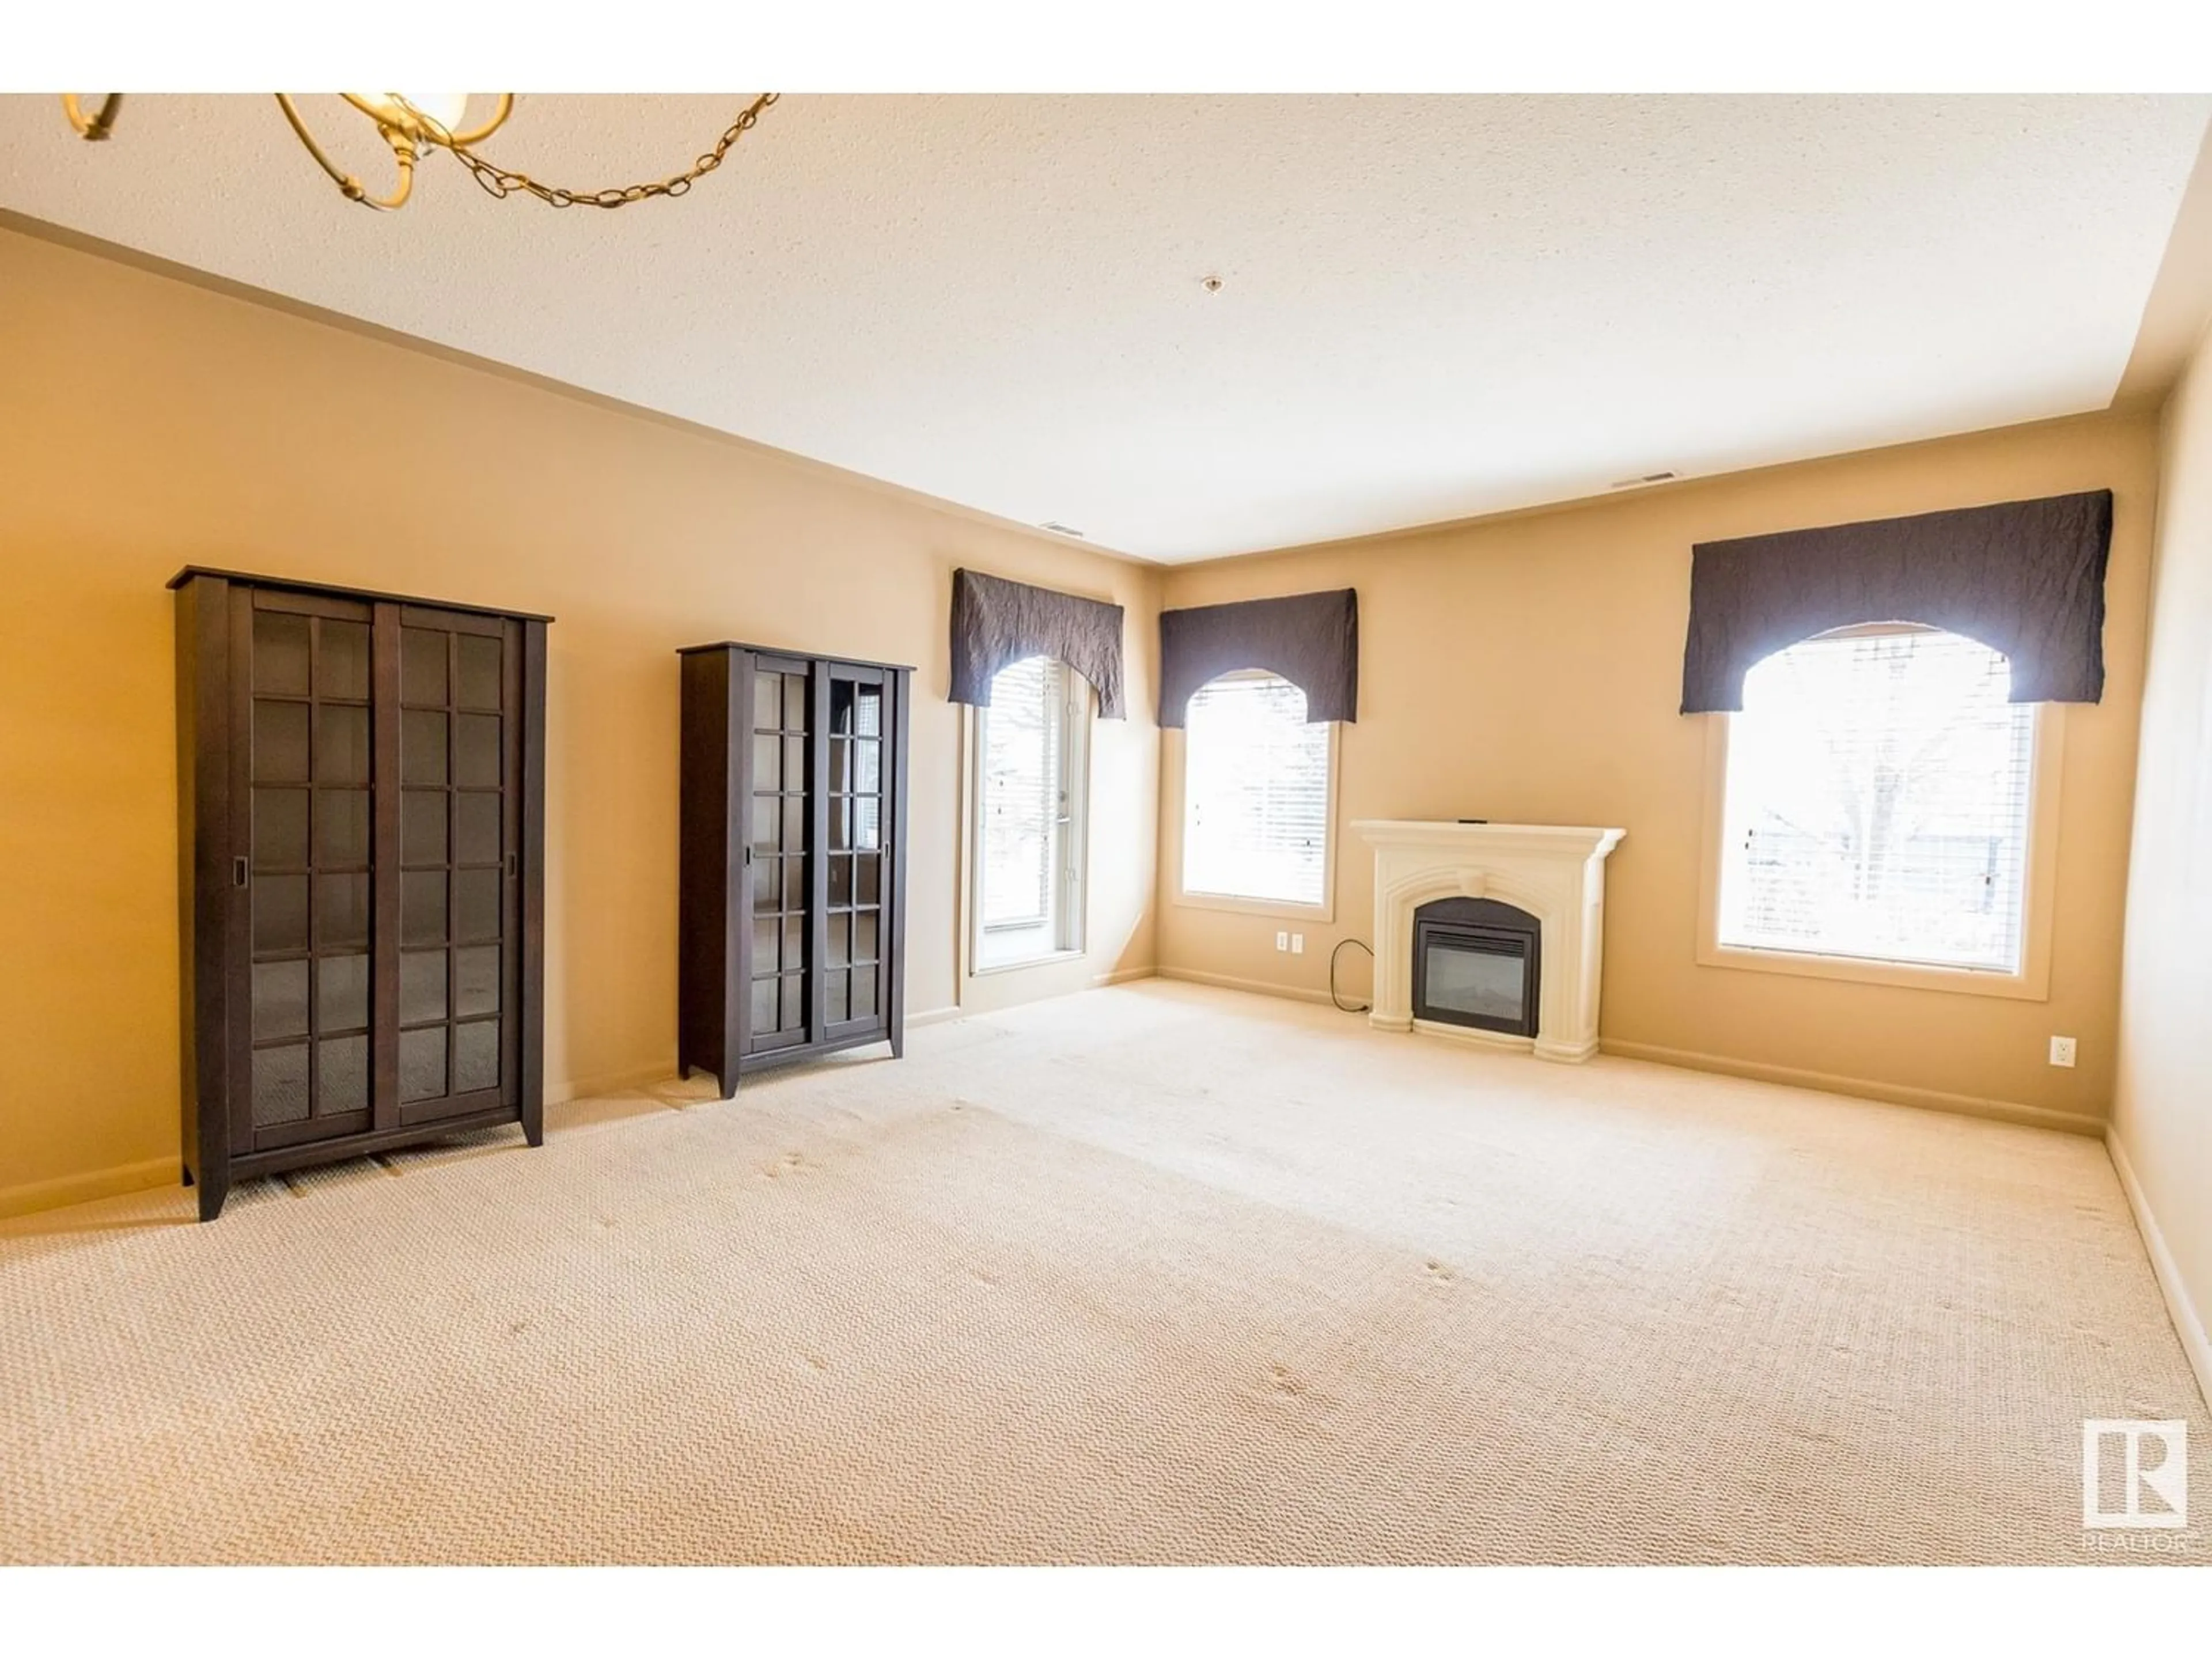 A pic of a room for #137 160 MAGRATH RD NW, Edmonton Alberta T6R3T7